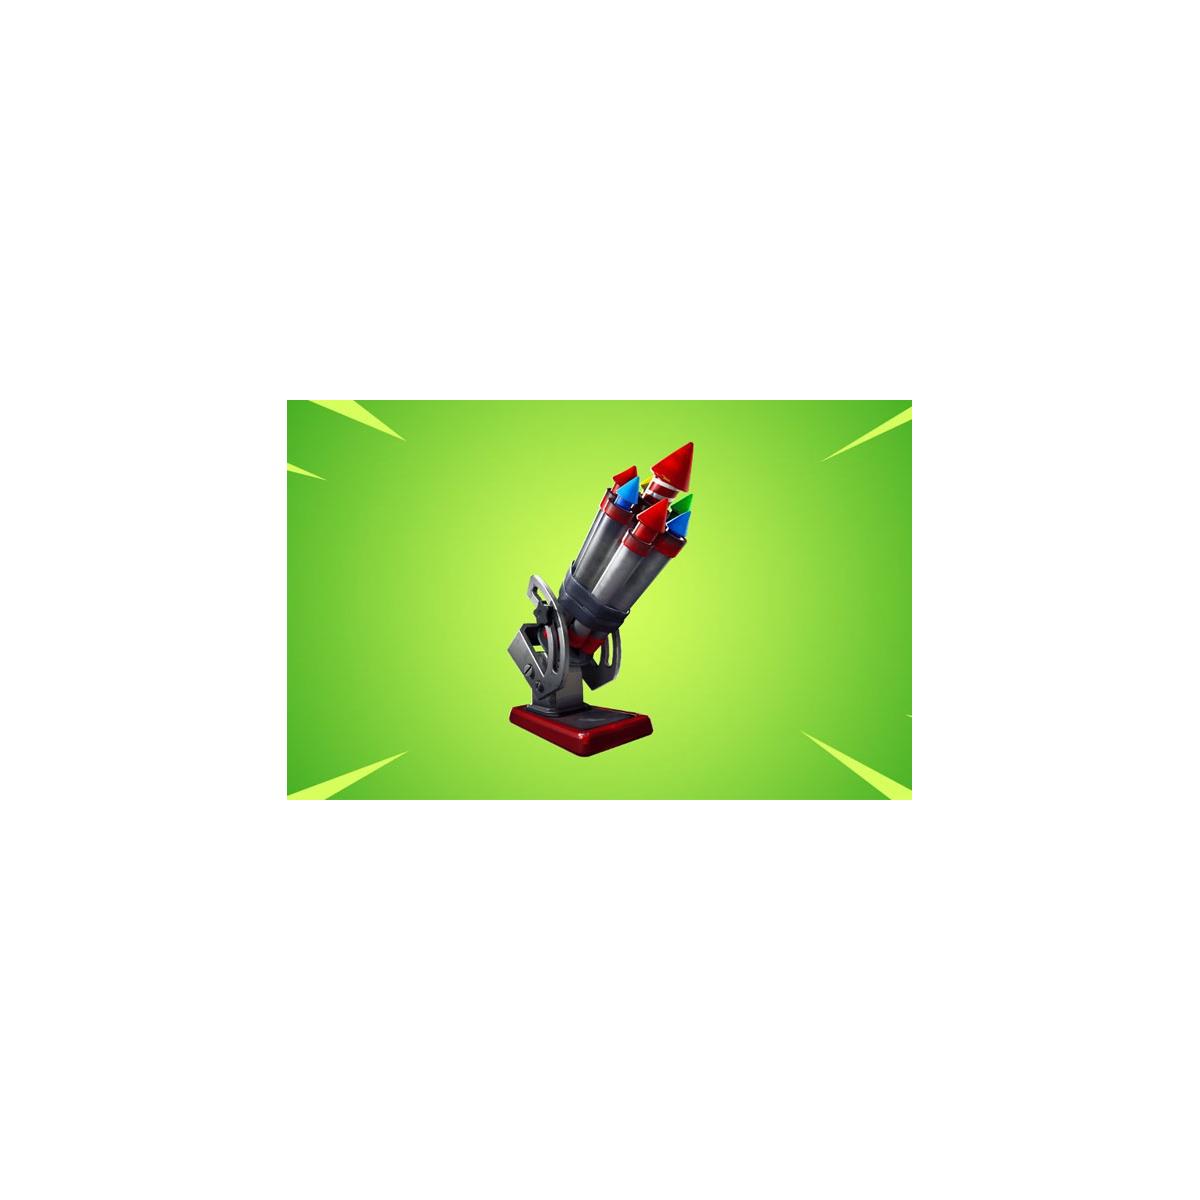 Bottle Rockets Coming To 'Fortnite' Soon, Here's What They'll